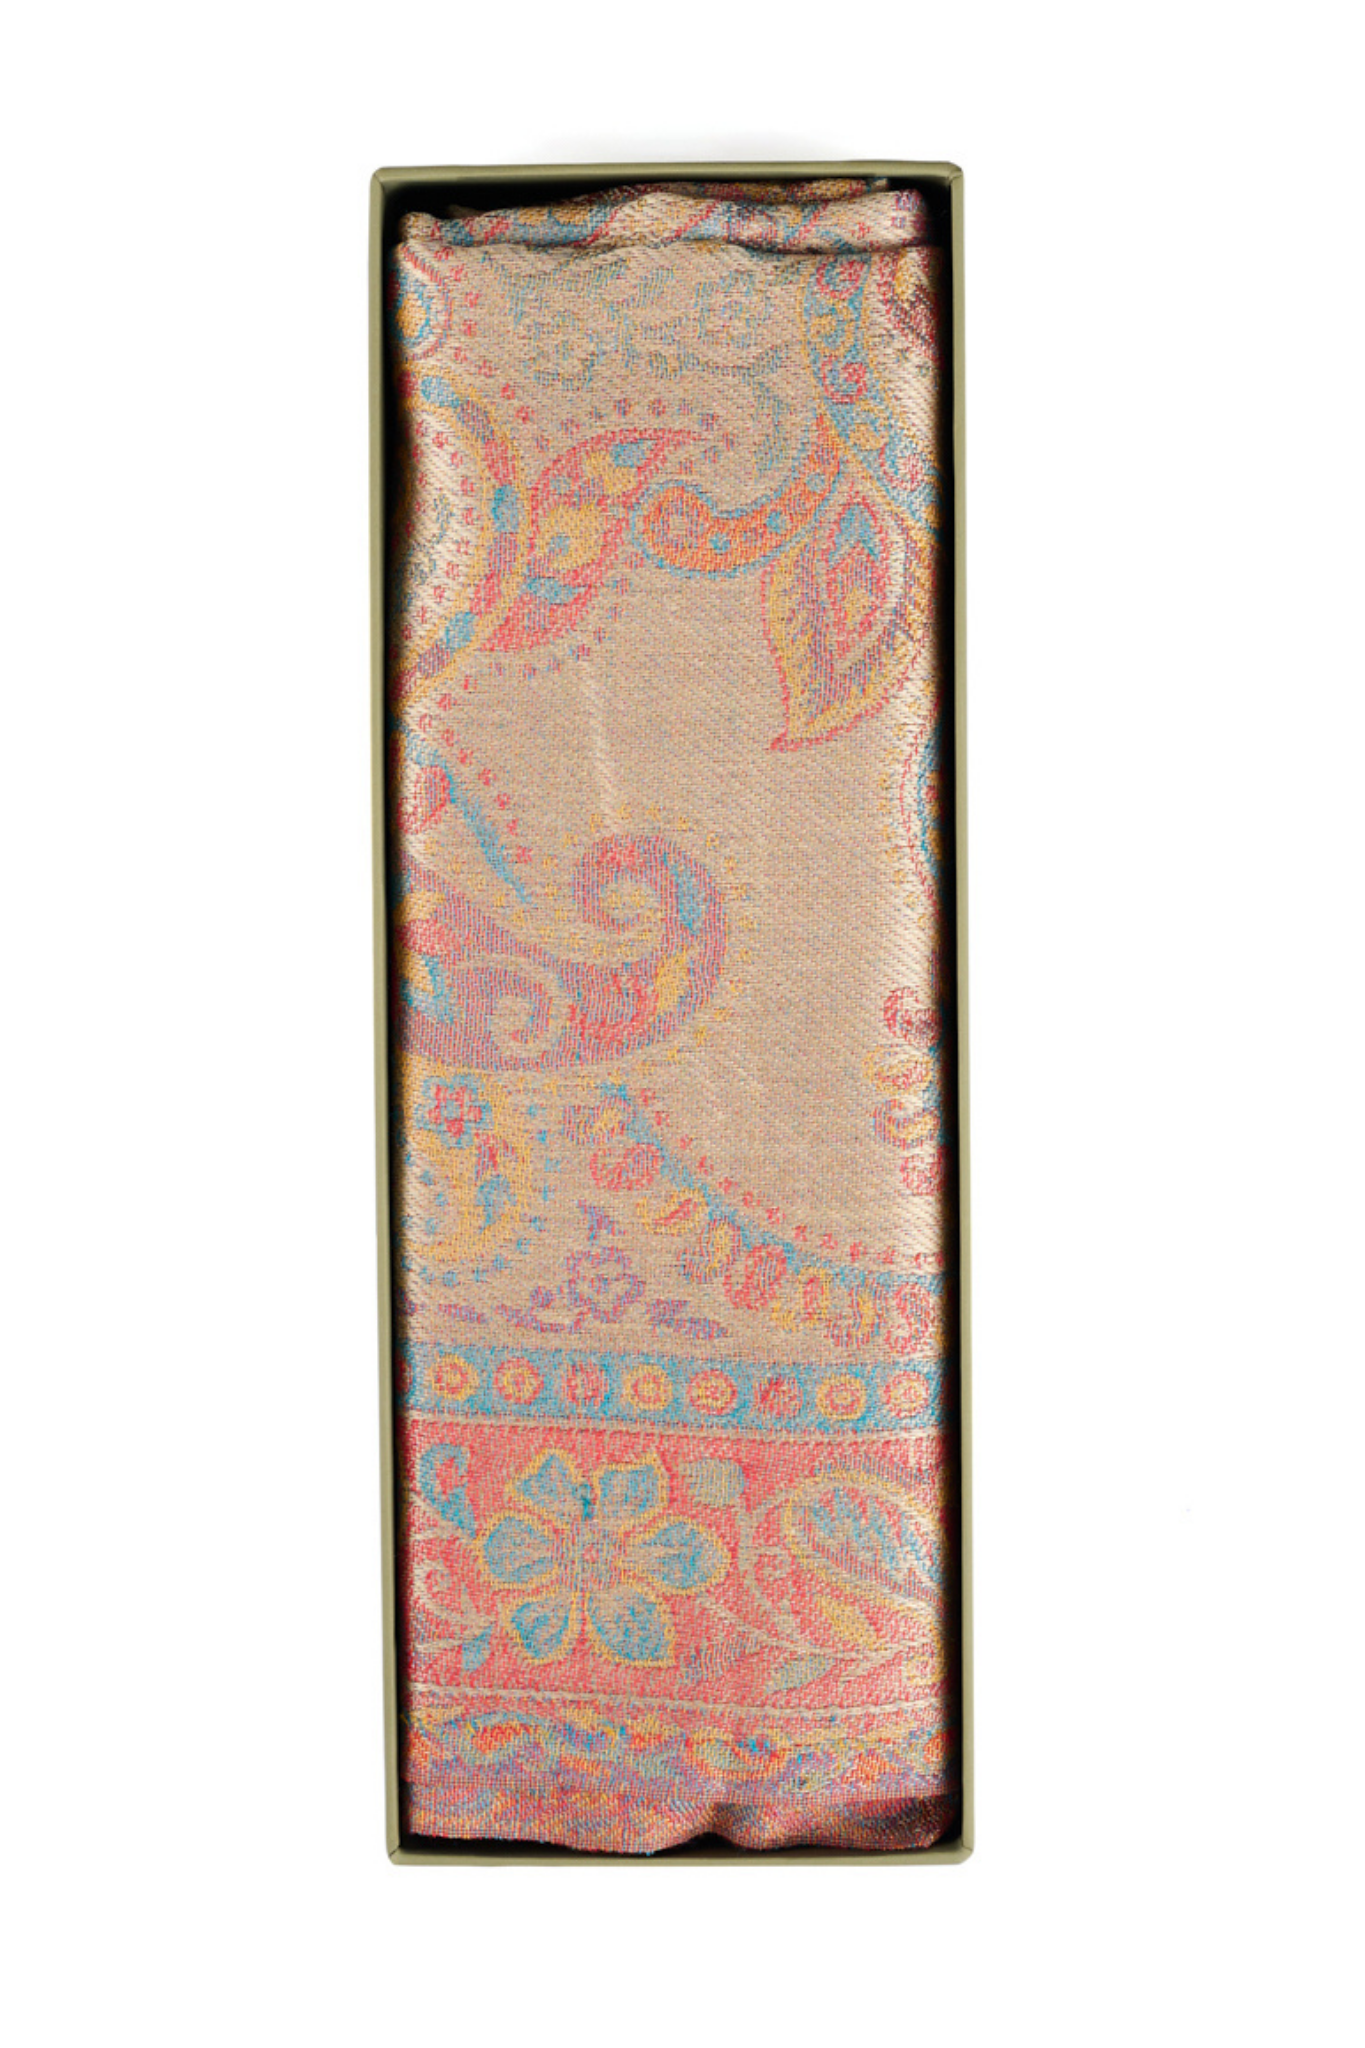 Gift Set of Paisley Silk Jamawar Stole or Him or Her ( Unisex Stole )